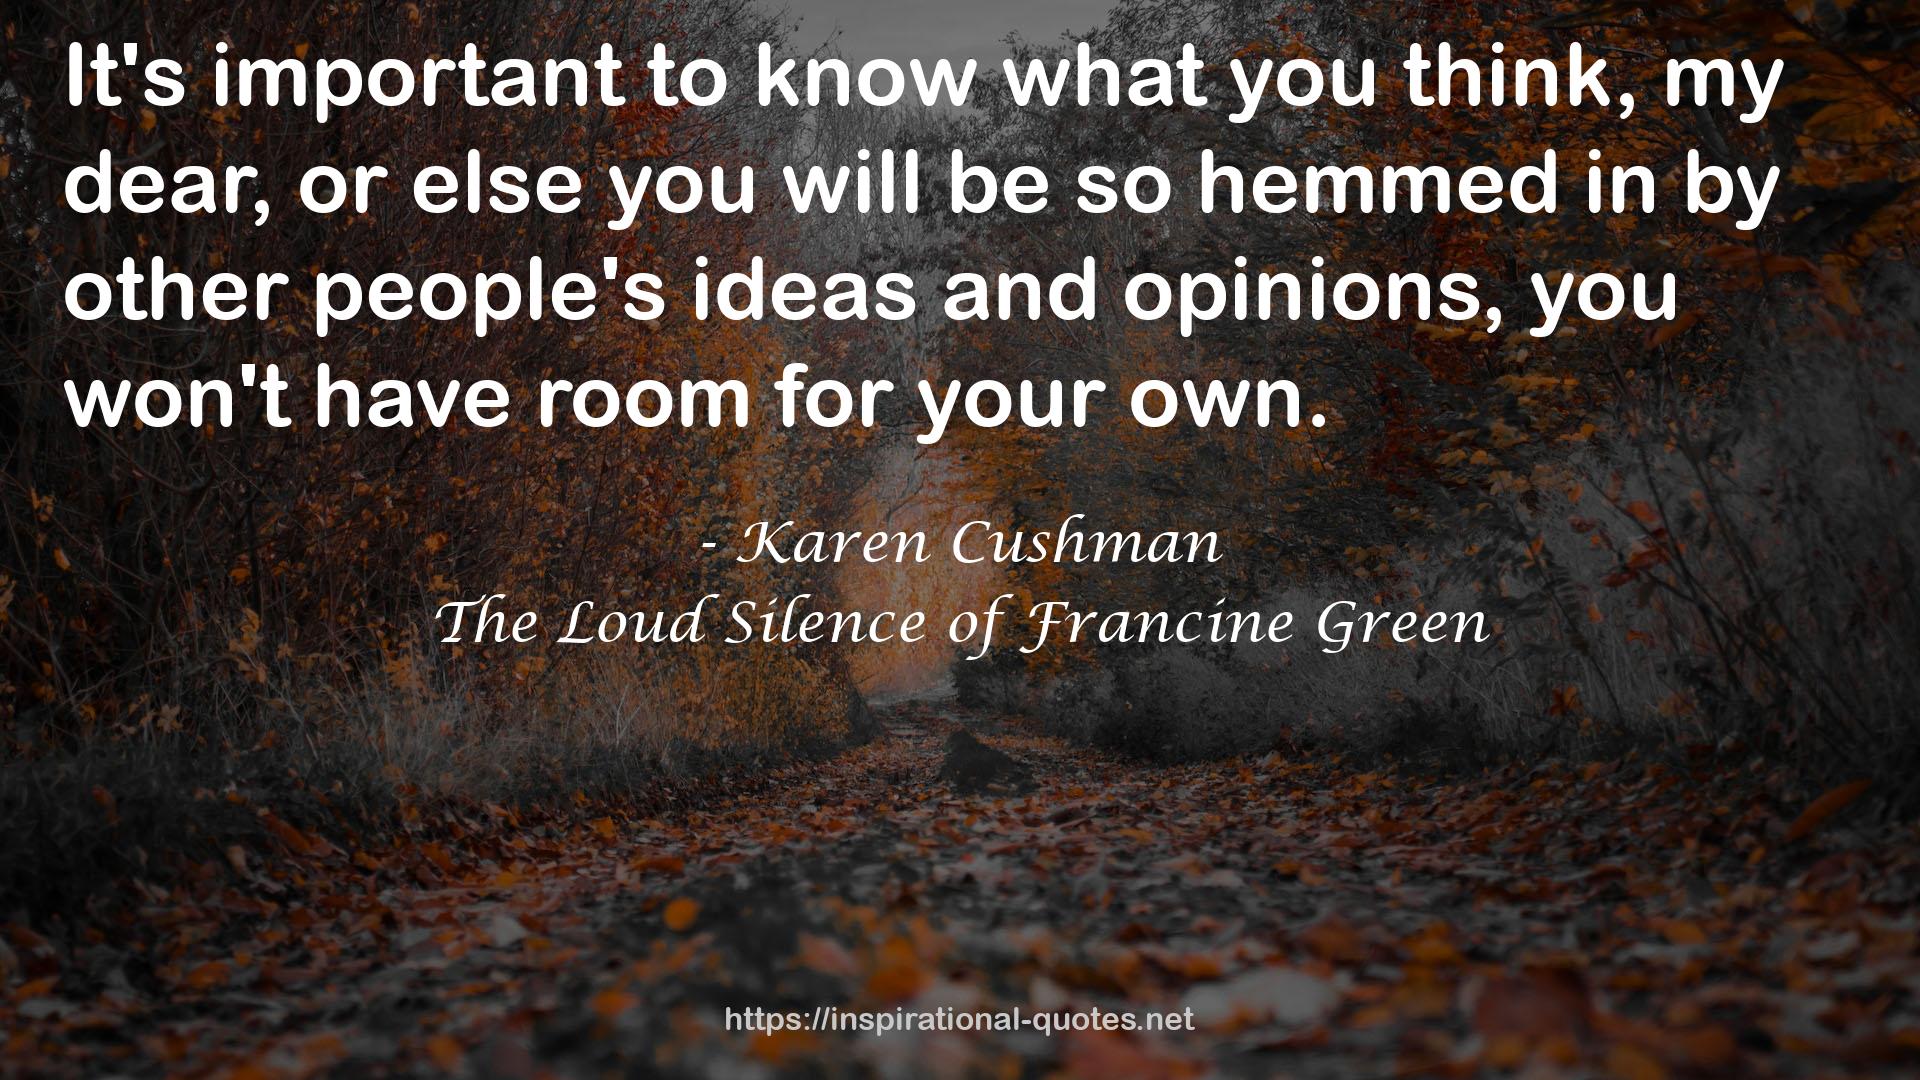 The Loud Silence of Francine Green QUOTES